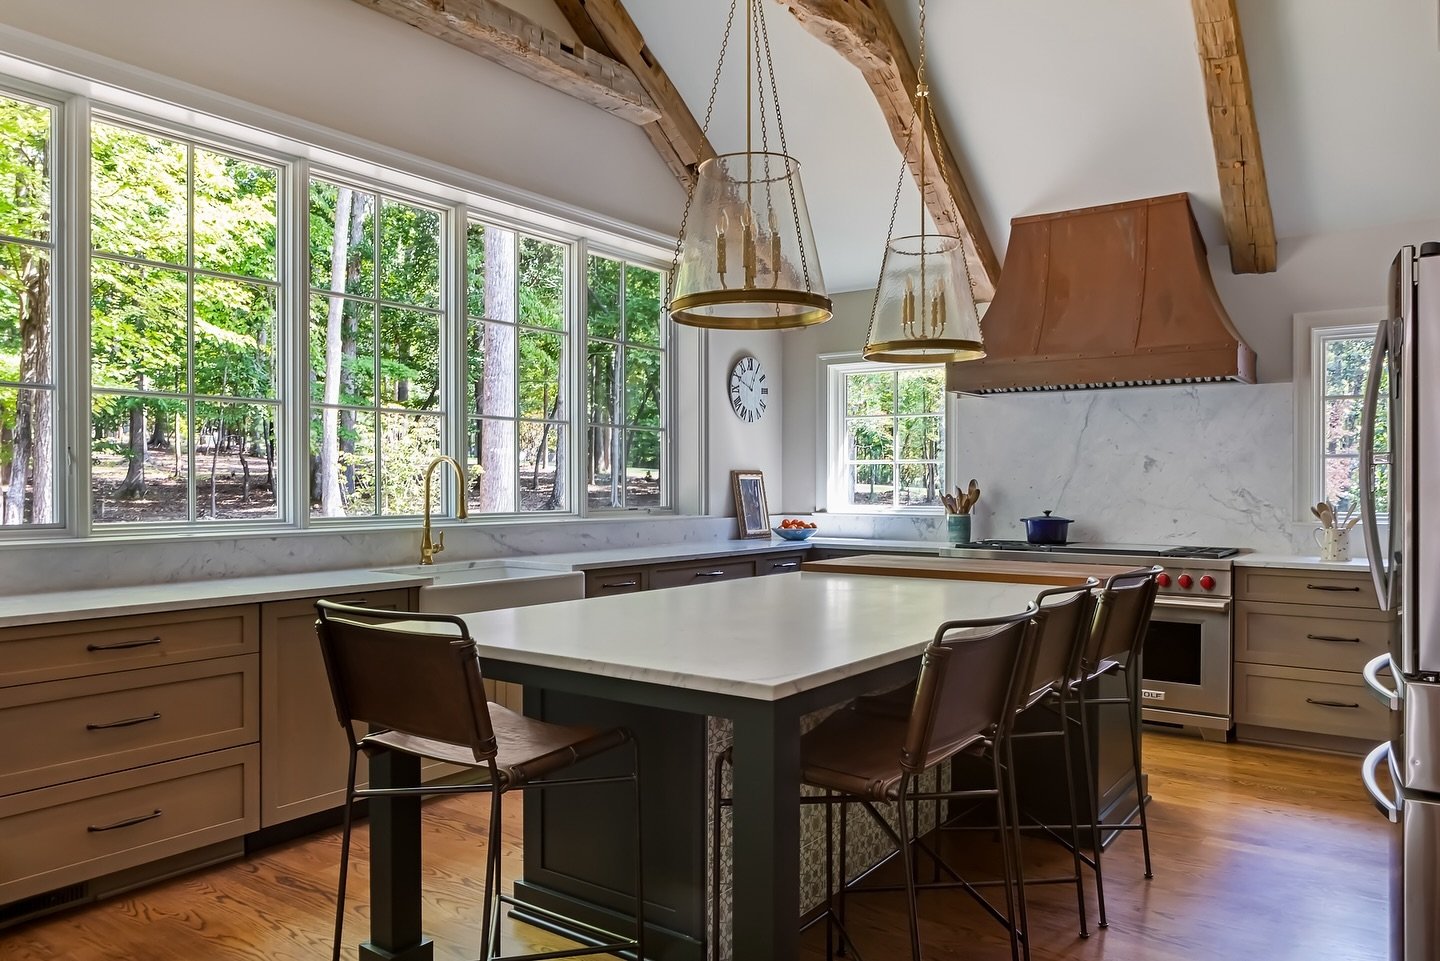 The heart of our client&rsquo;s home: a kitchen adorned with natural materials, rustic wood beams, and a distinctive patinated copper hood. Our team enjoyed working with our clients, who grew up in Ireland, to create a unique vision for this space. T